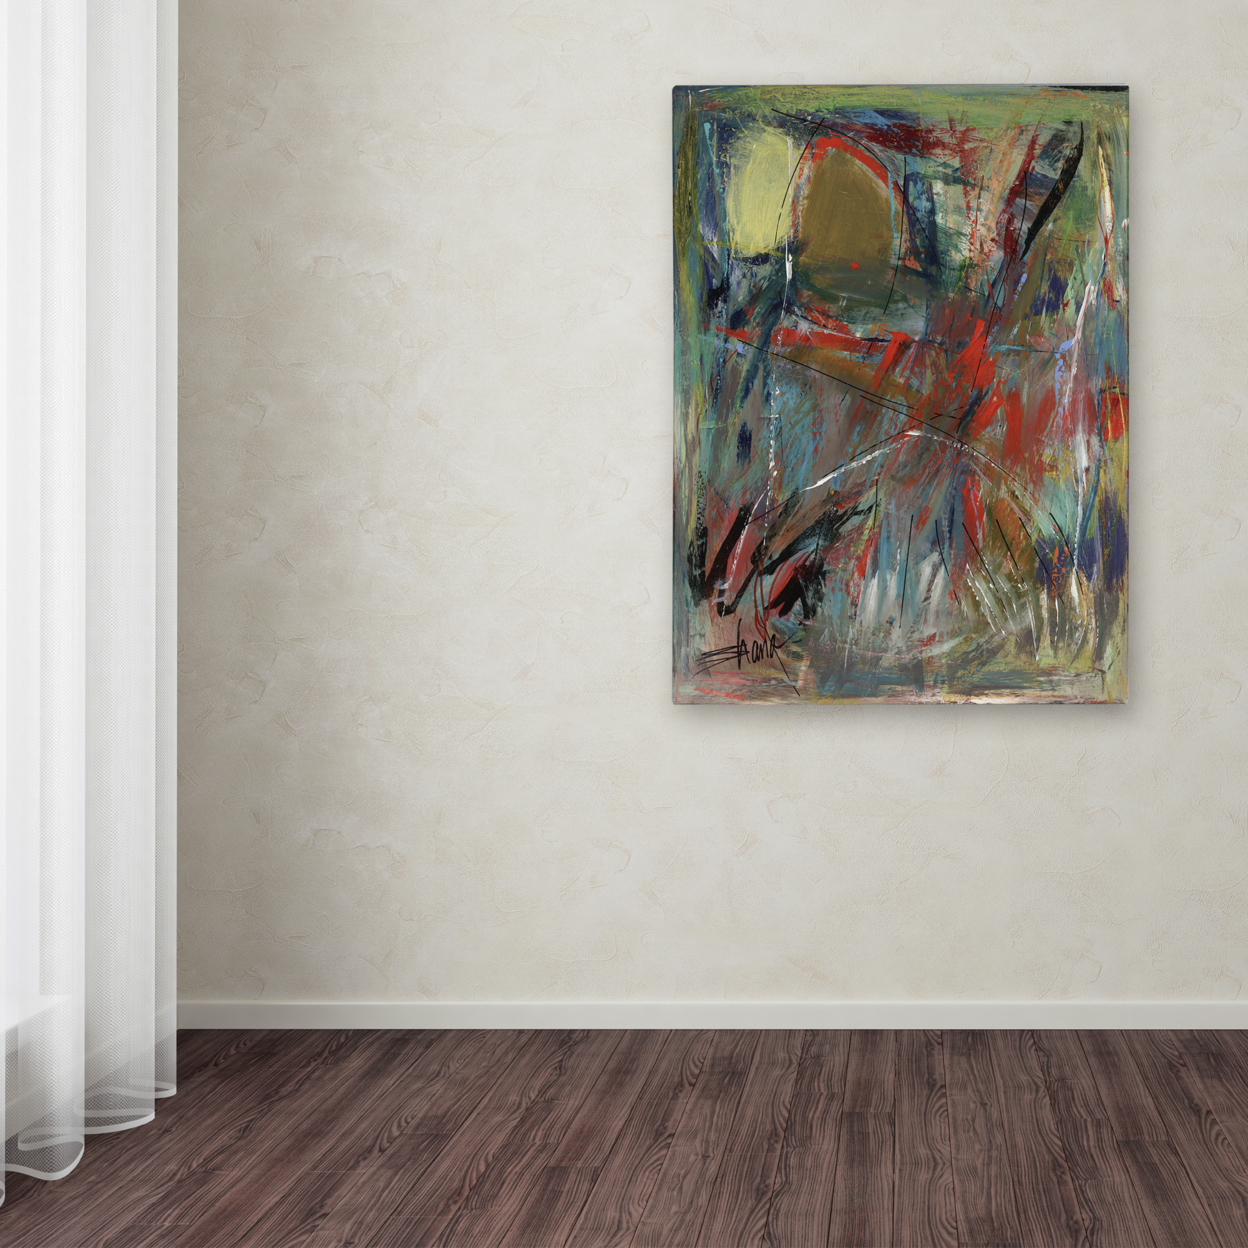 Shana Doumingez 'Ringing The Bell' Canvas Wall Art 35 X 47 Inches